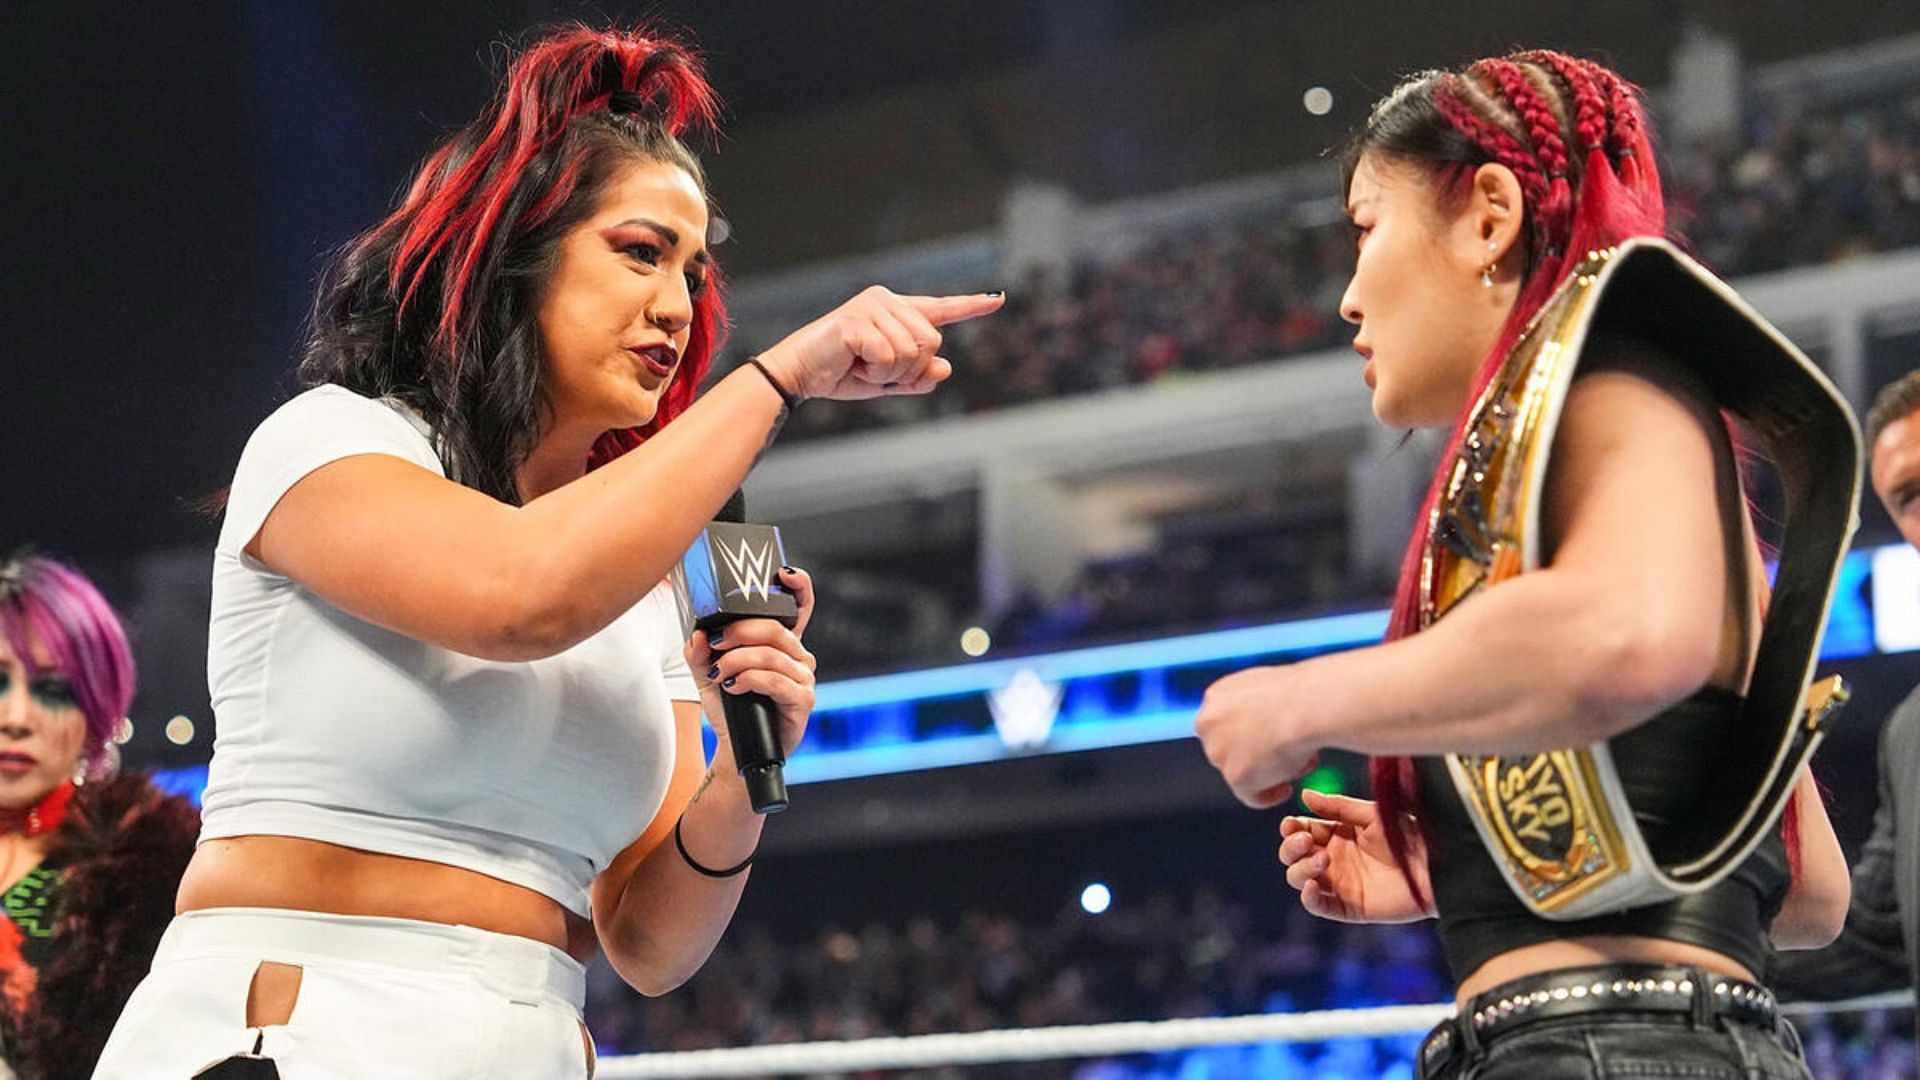 Bayley could be outnumbered by Damage CTRL